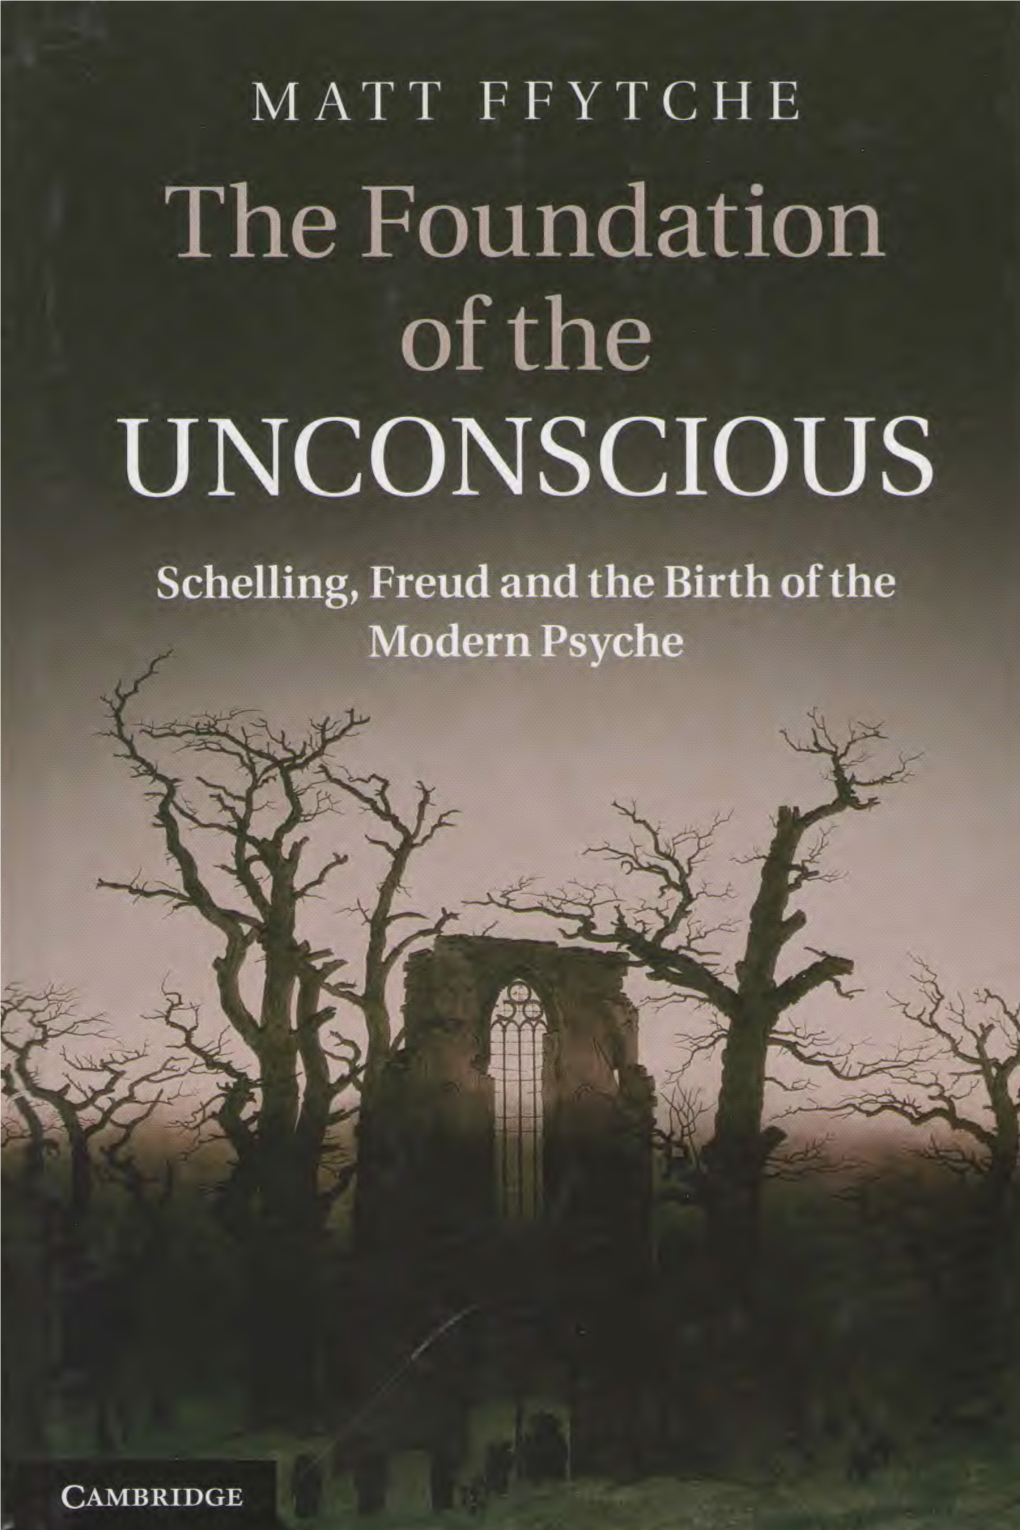 The Foundation of the UNCONSCIOUS Schelling, Freud and the Birth of the Modern Psyche